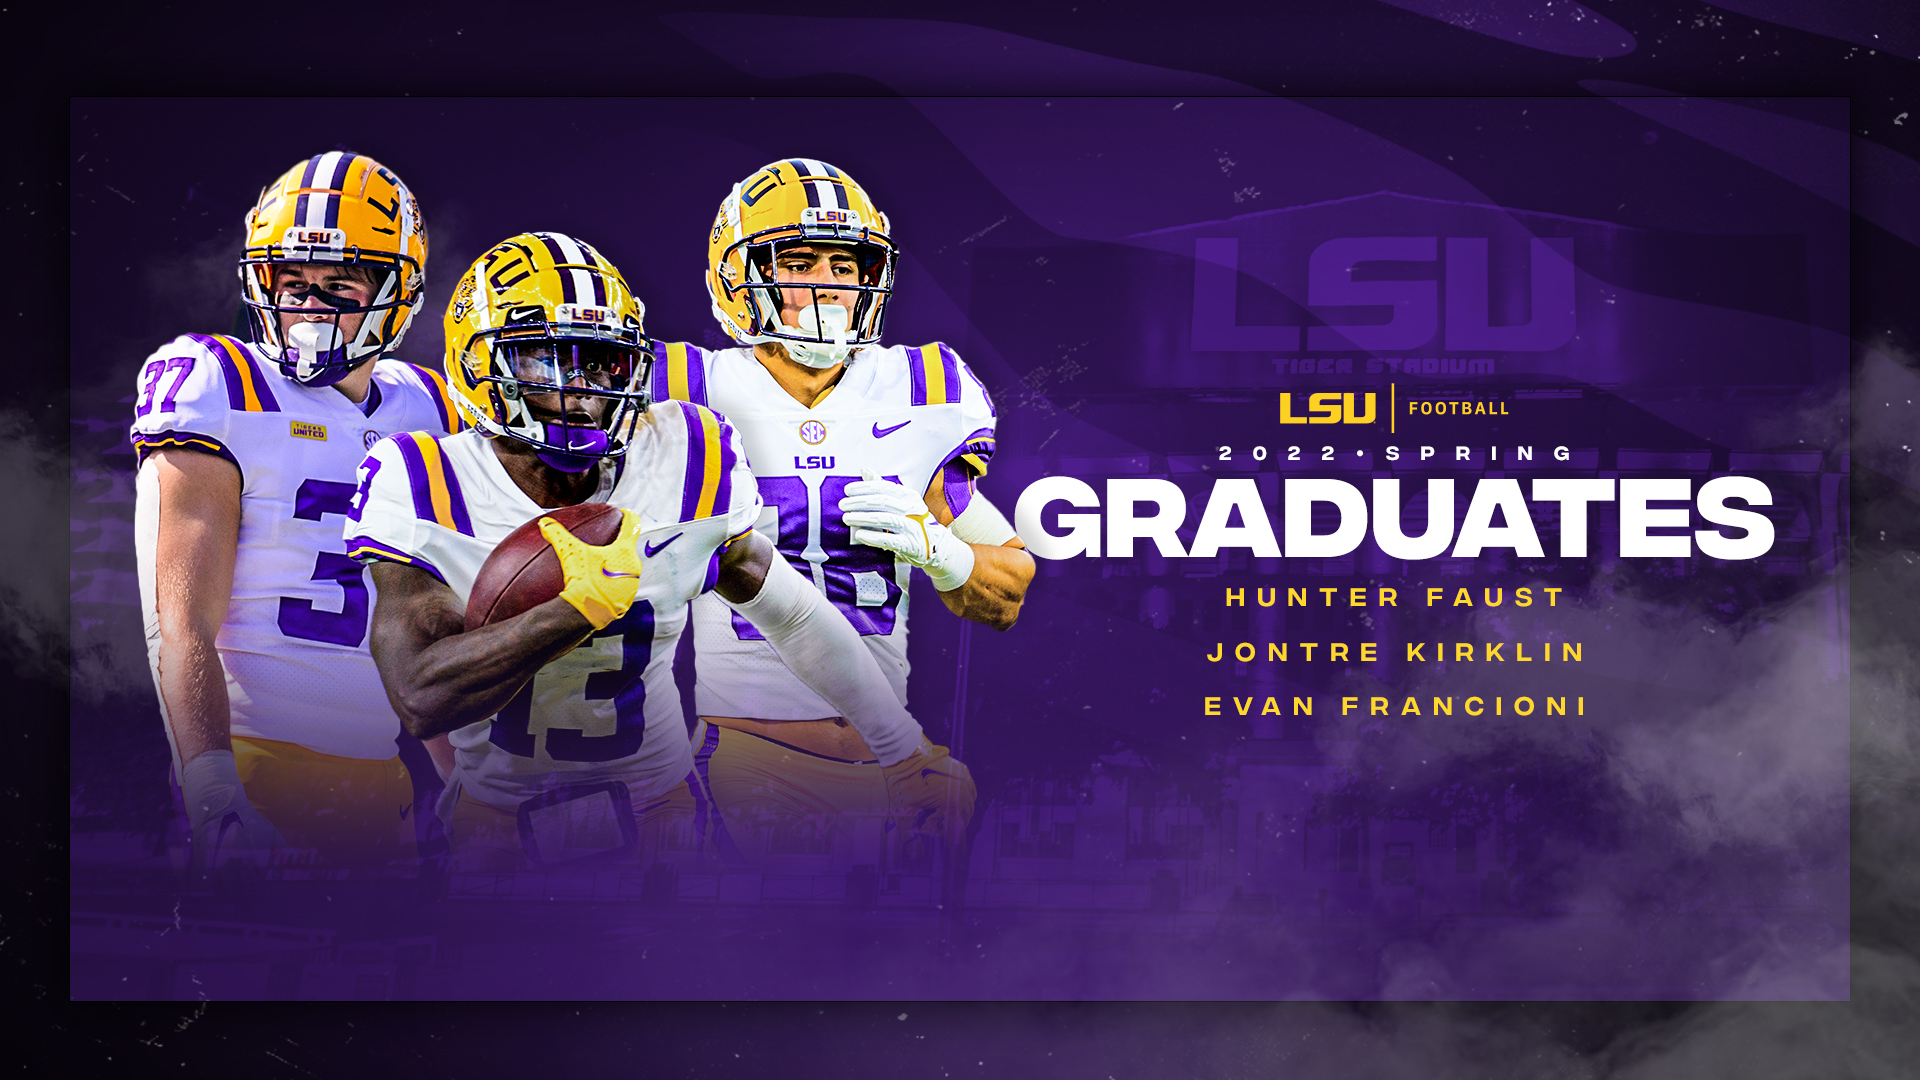 Four Football Players Earn College Degrees   LSU Academic Center